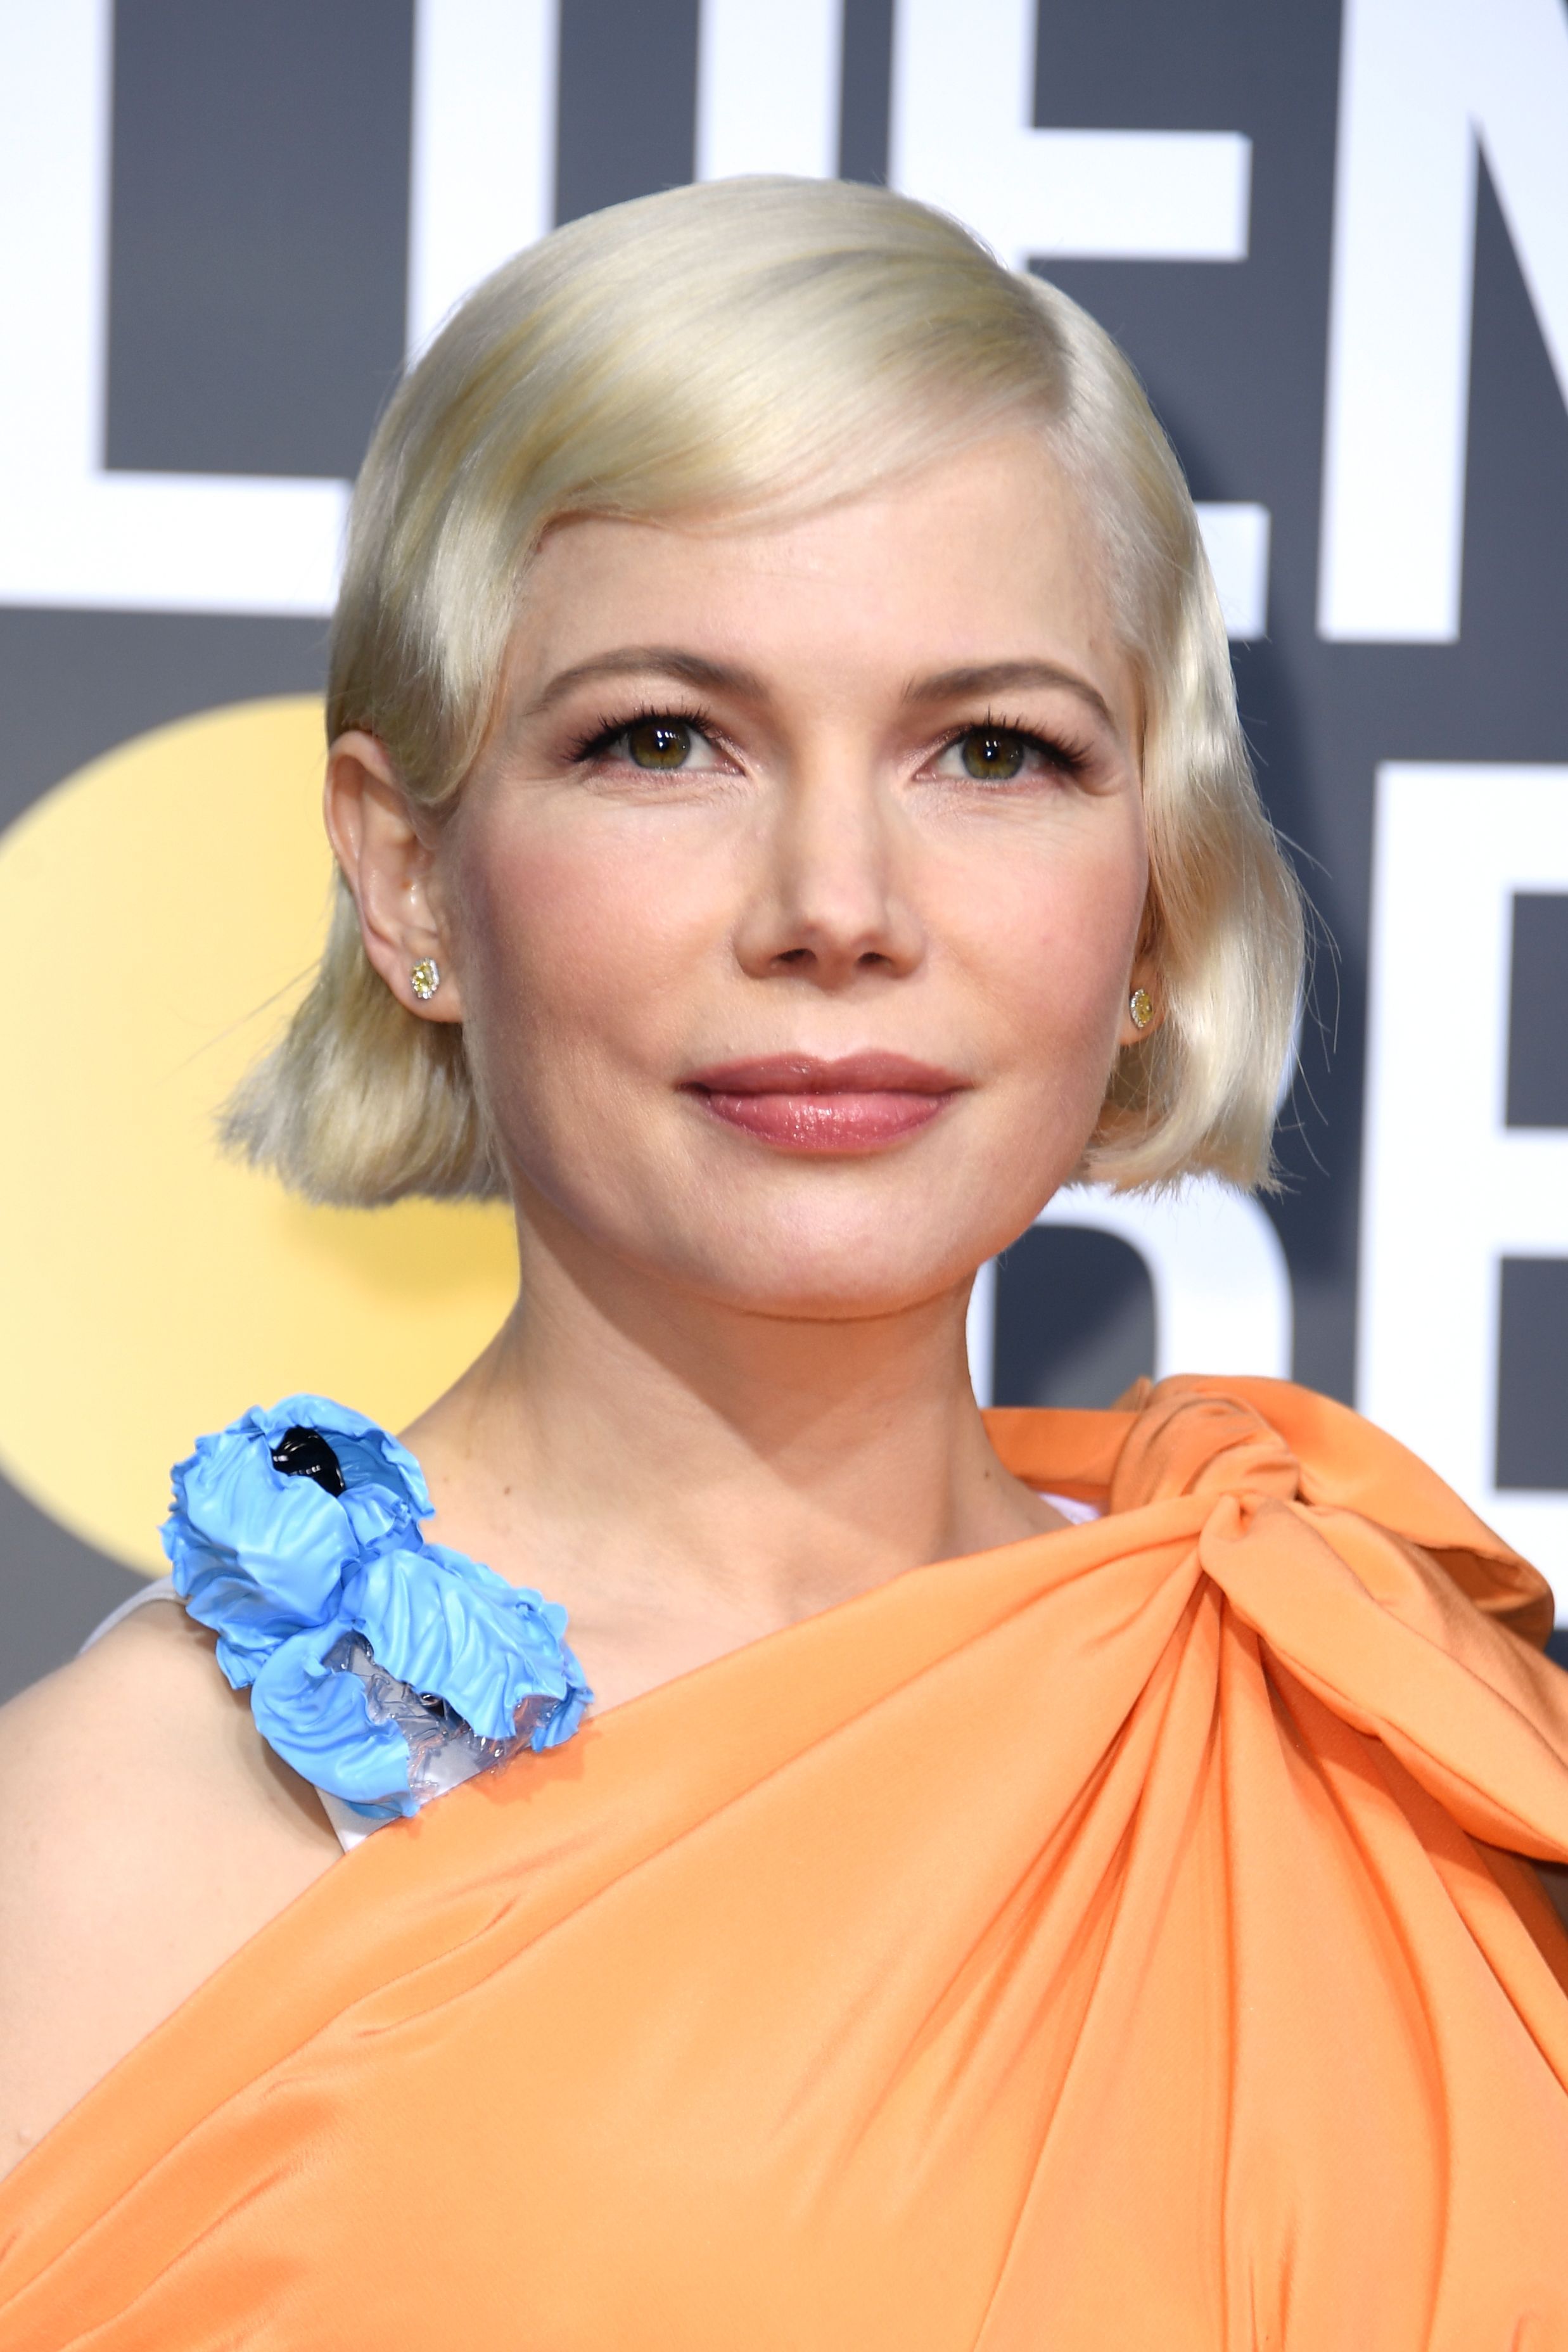 Golden Globes 2020: Michelle Williams hints at abortion experience as she  defends a 'woman's right to choose